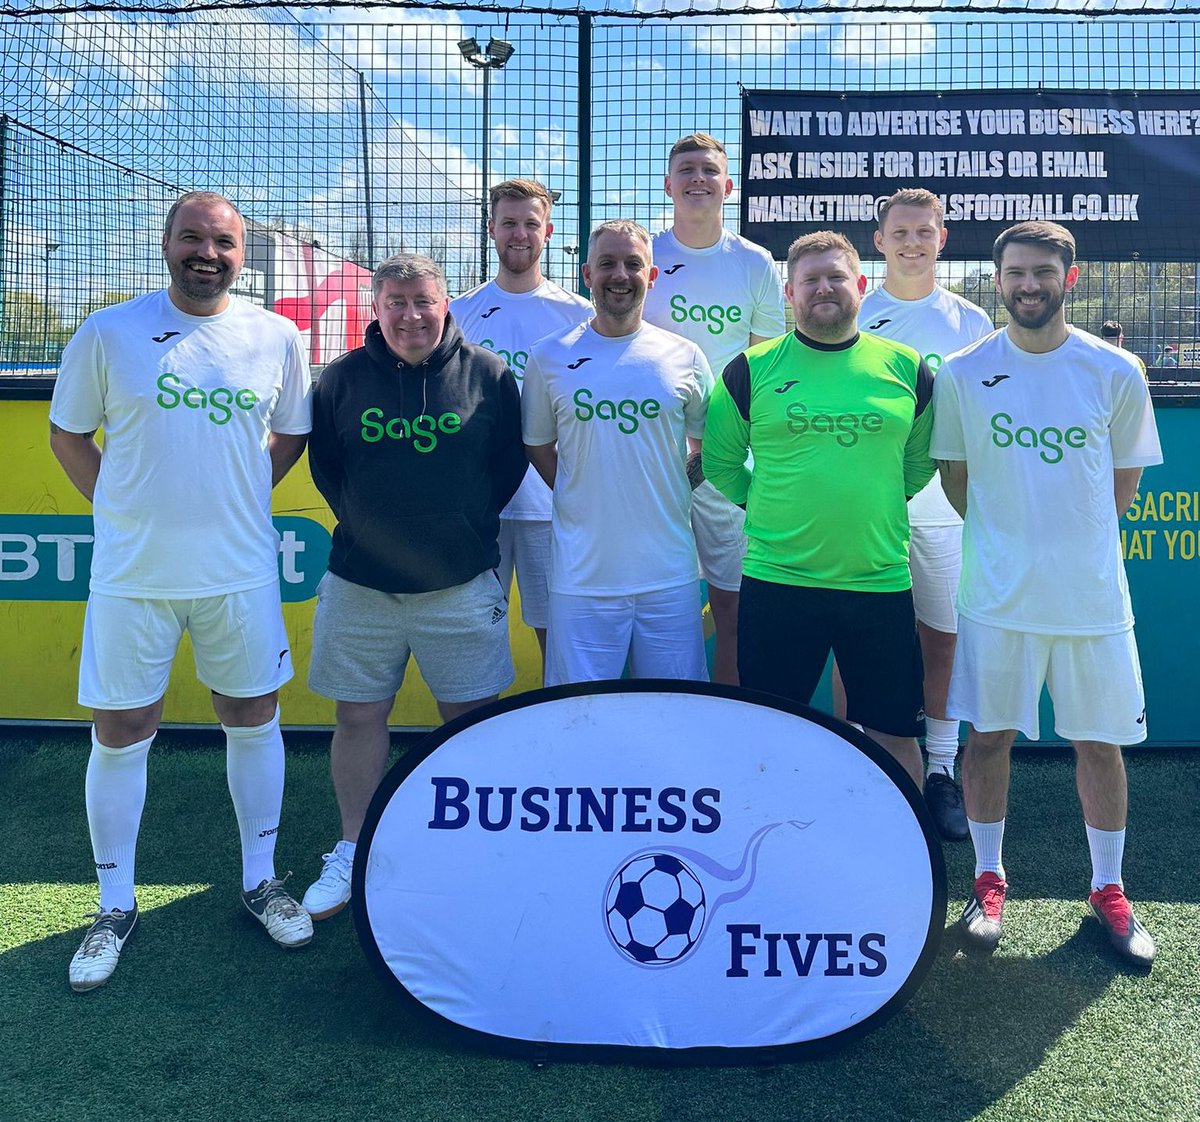 Welcome @sageuk to our #biz5s National Finals event in Leeds! Good luck to the team playing in support of @feedingfamilie1 ⚽️ #footballforgood #charity #networking